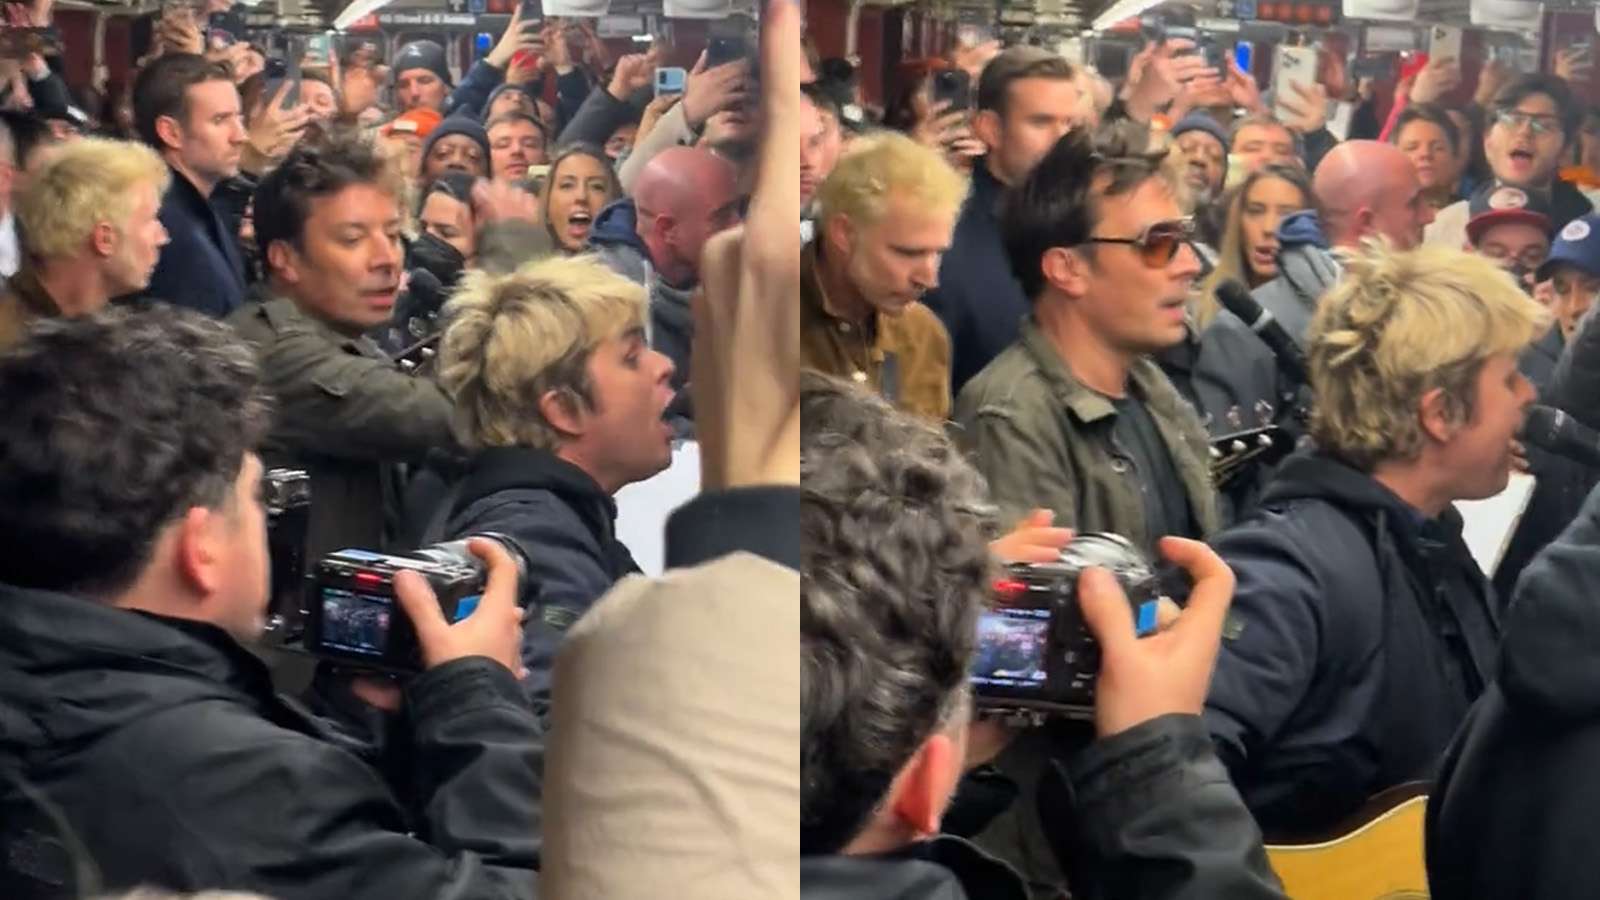 Jimmy Fallon with green day in nyc subway